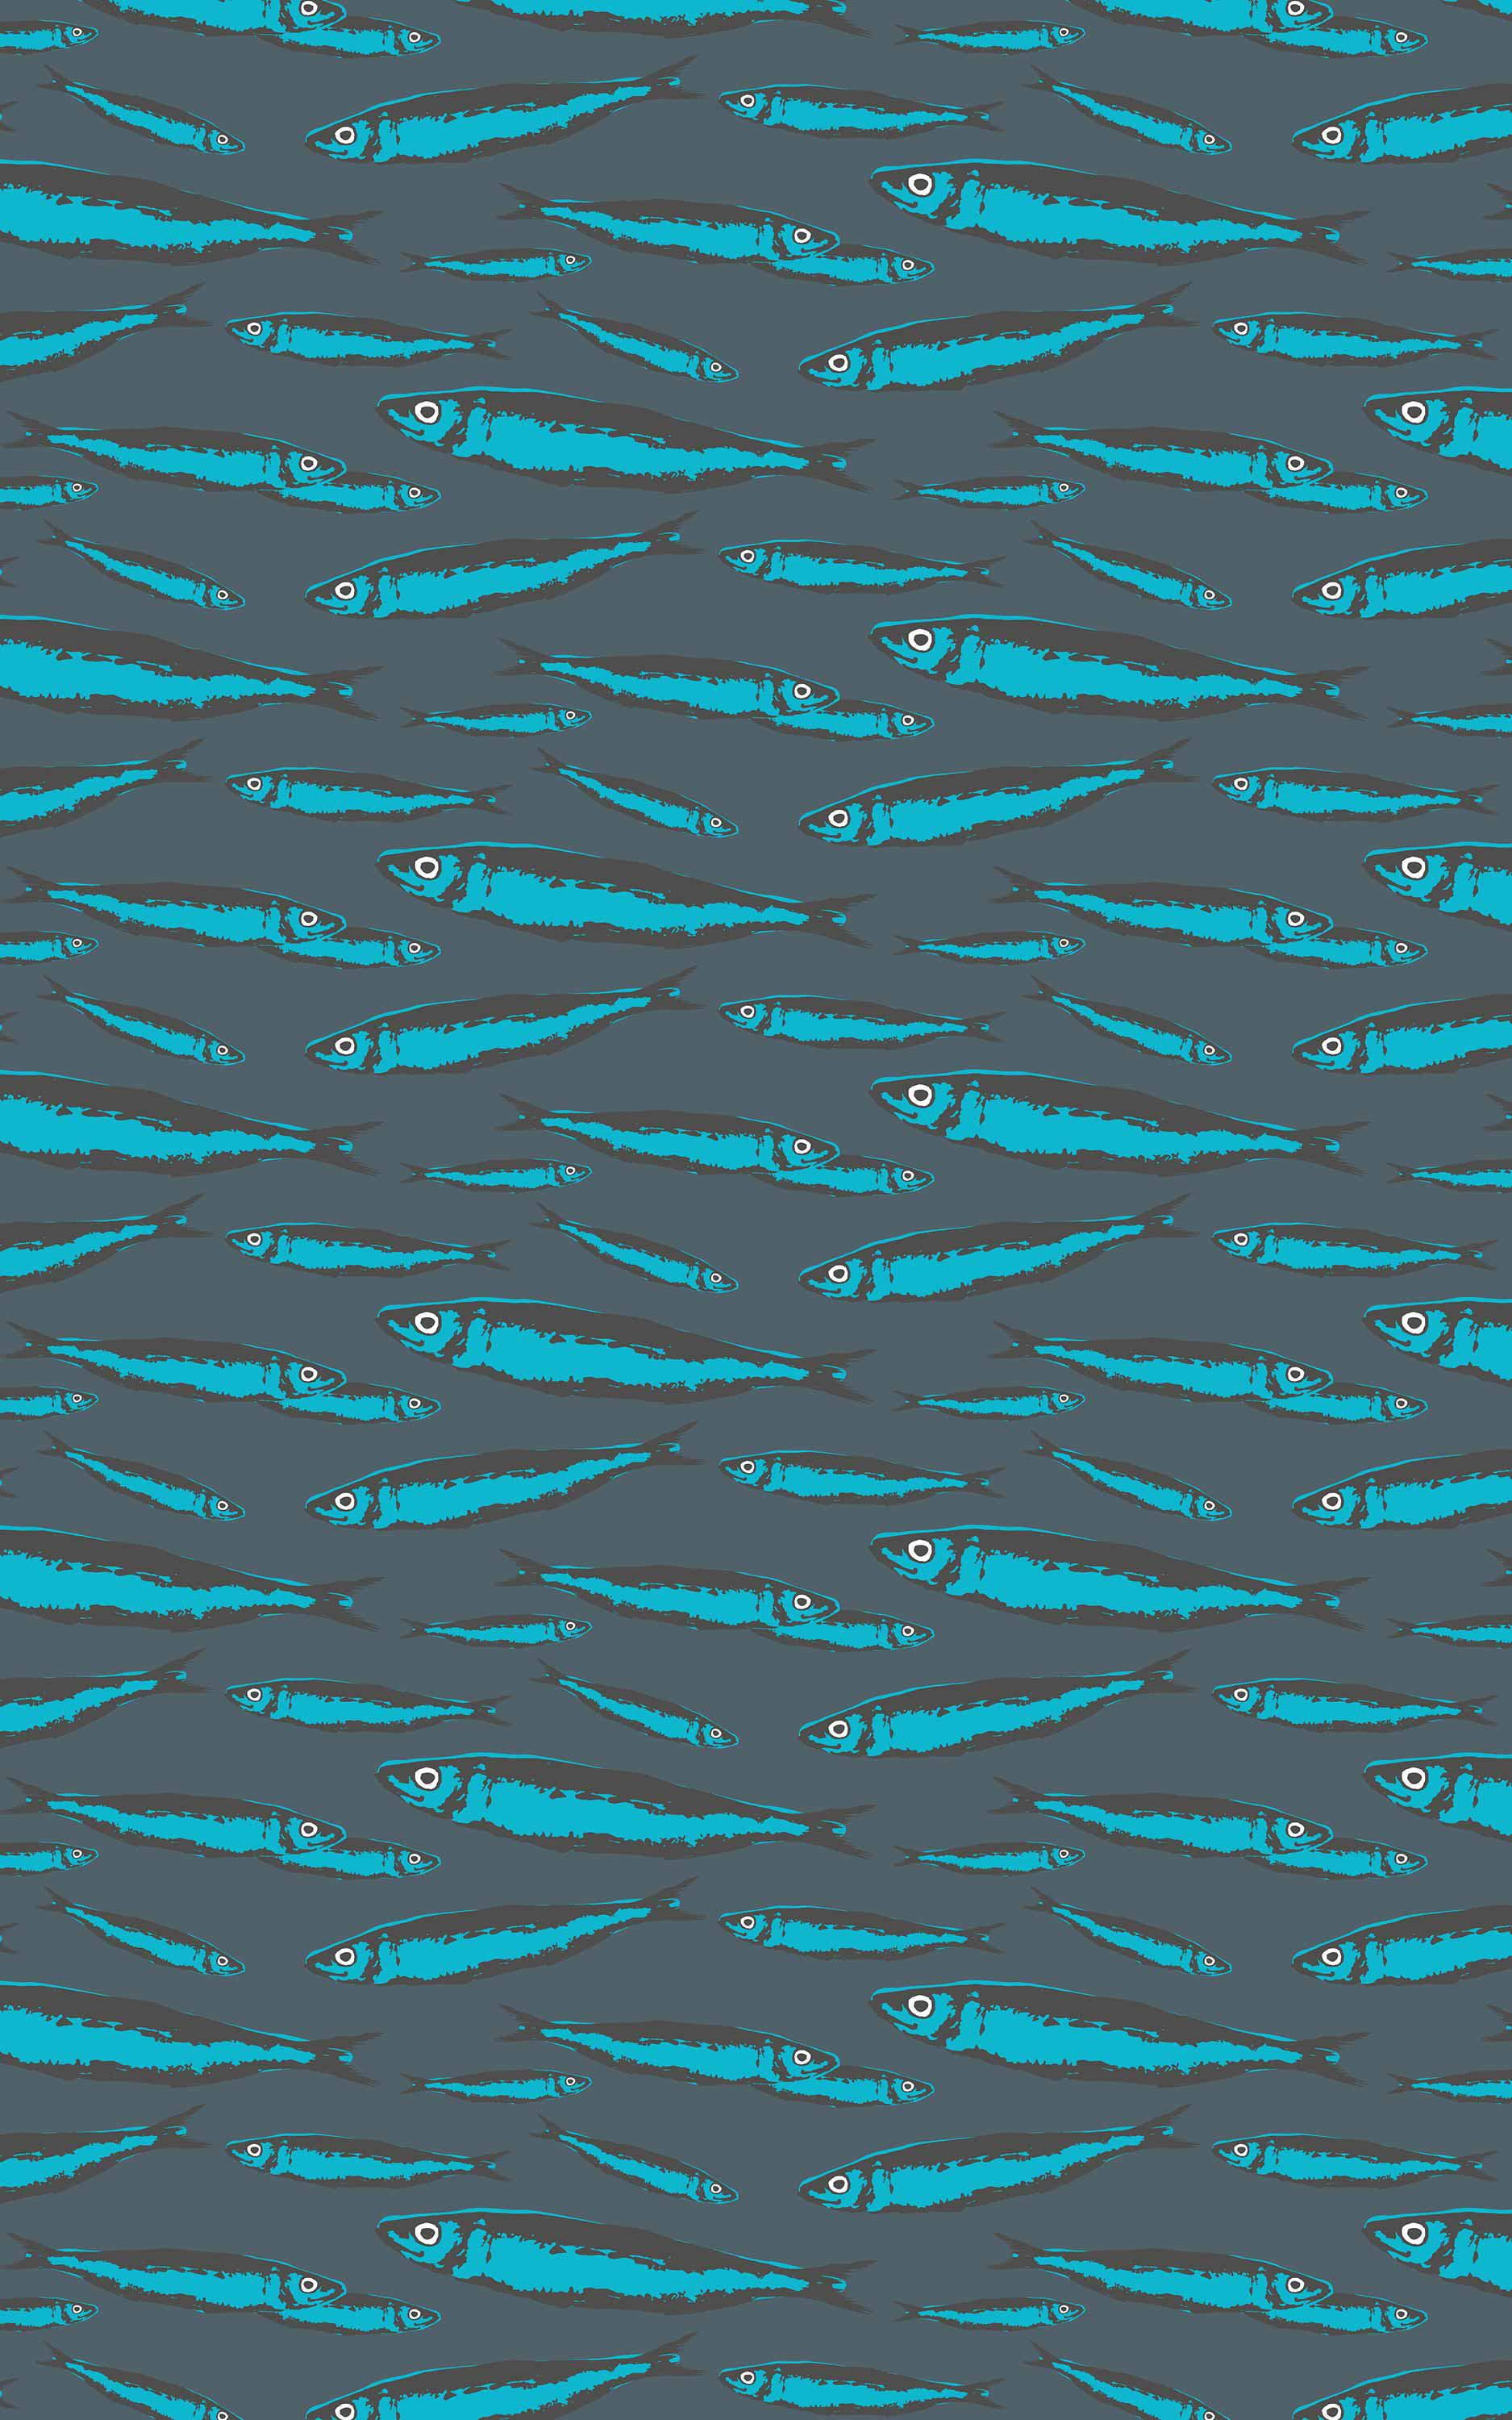 SARDINE CAN coverings / wallpaper from GMM